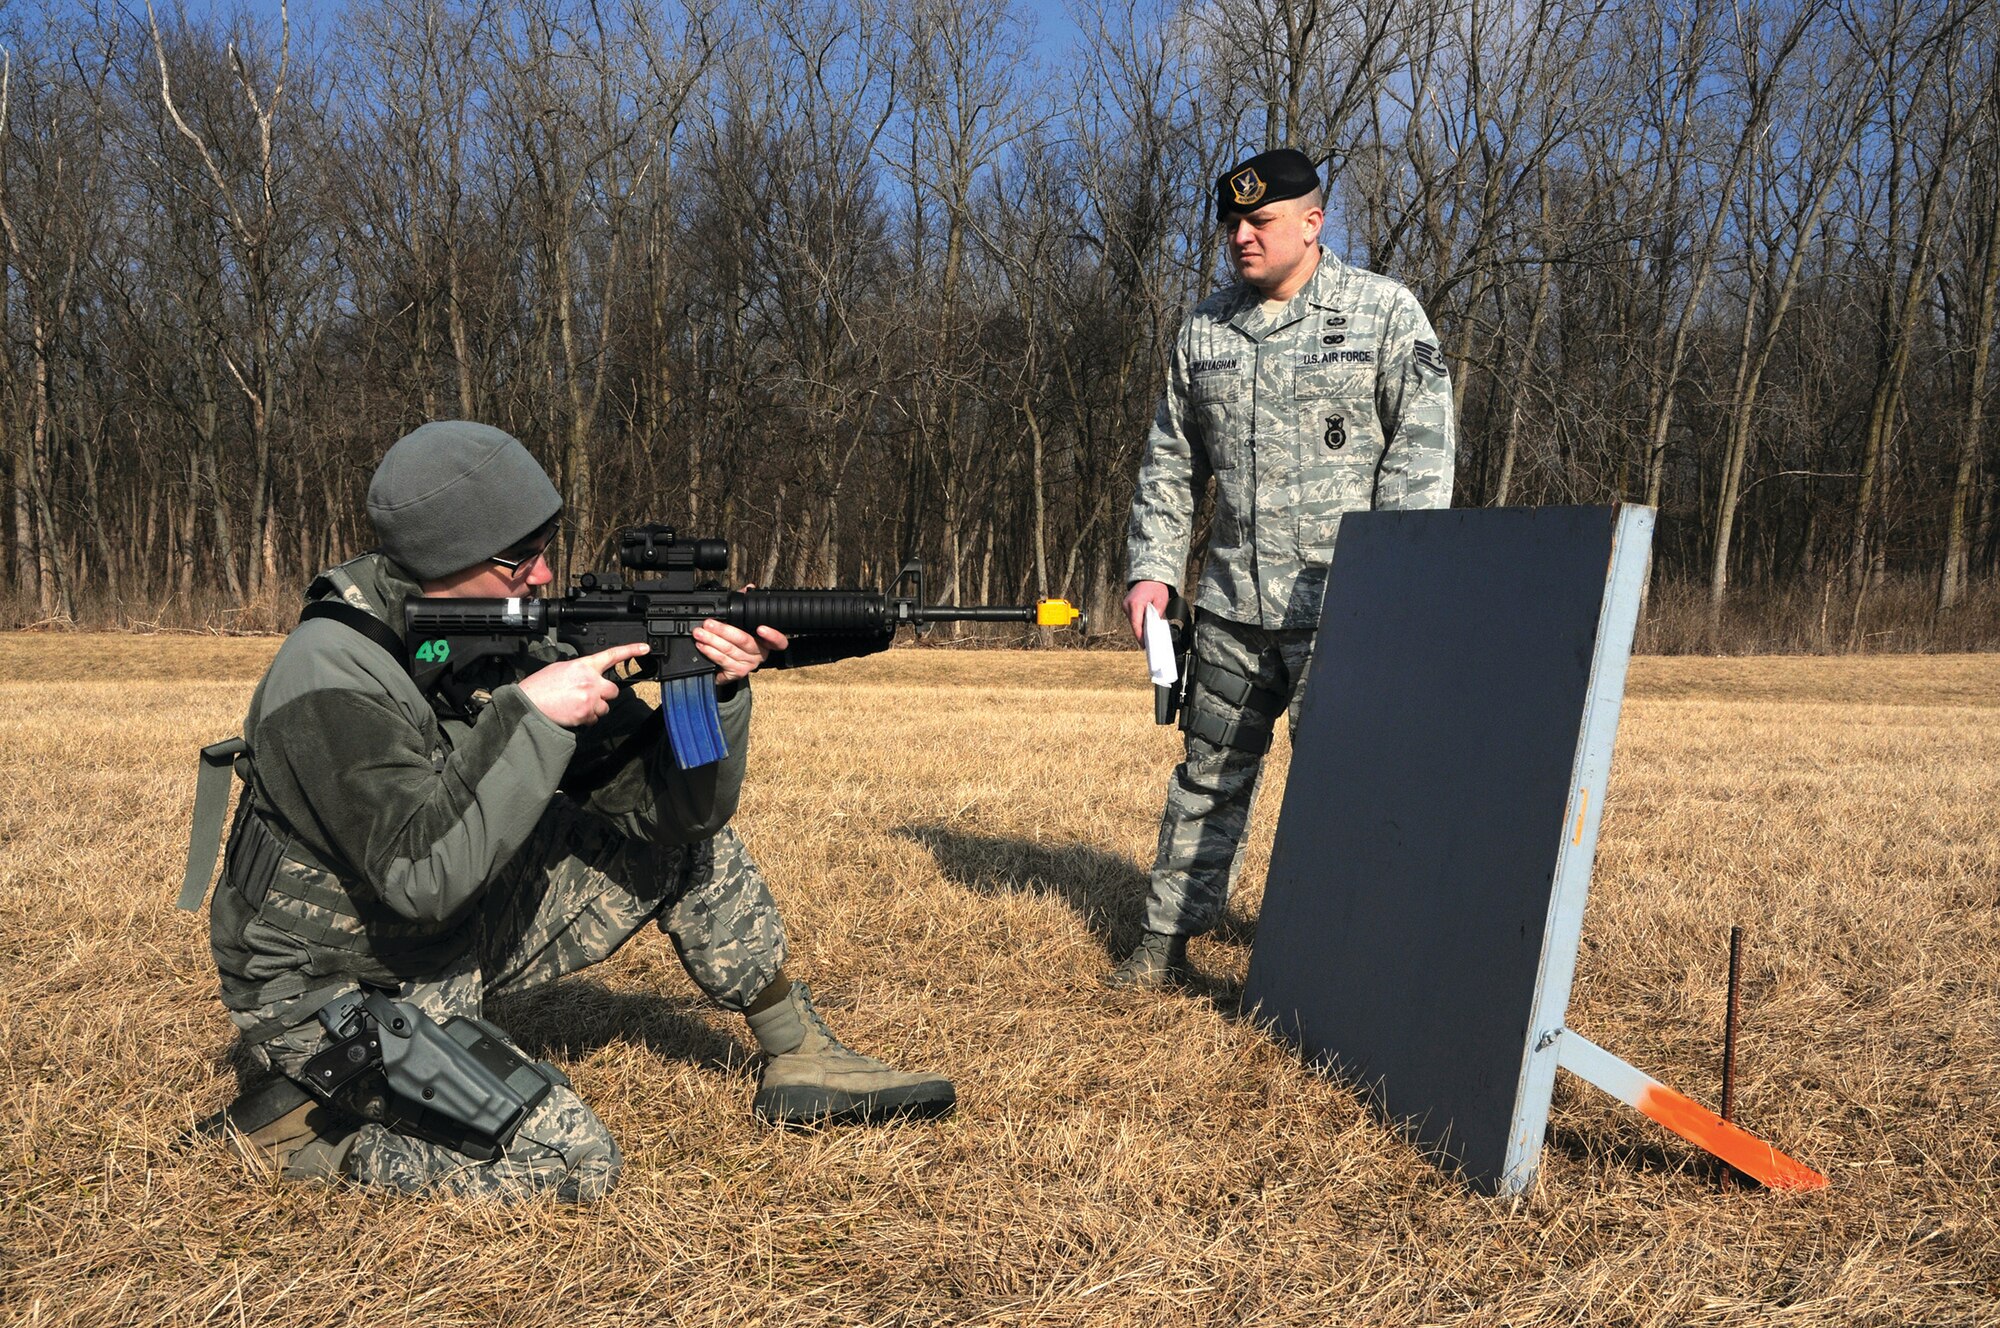 WRIGHT-PATTERSON AIR FORCE BASE, Ohio - Airman 1st Class Katie Wheeler, 445th Security Forces Squadron, practices maneuvering techniques as Staff Sgt. Michael O’Callaghan, 445 SFS course instructor, looks on during the unit’s “shoot, move, communicate” training event March 9. (U.S. Air Force photo/Tech. Sgt. Anthony Springer)